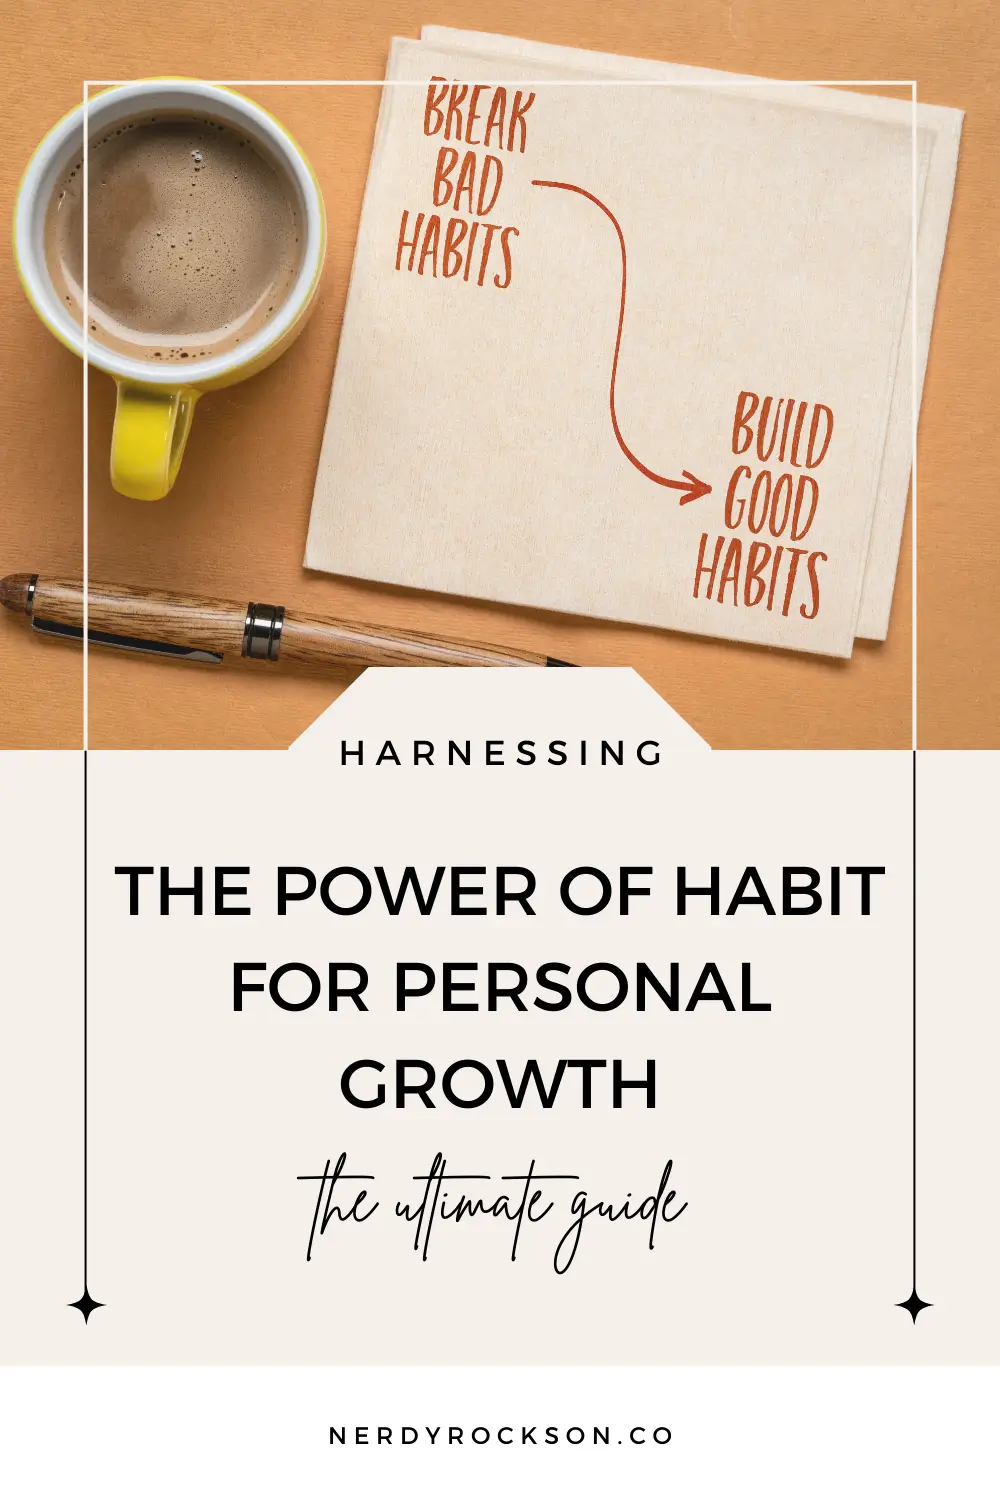 The Power of Habits: How to Form New Habits for Personal Growth